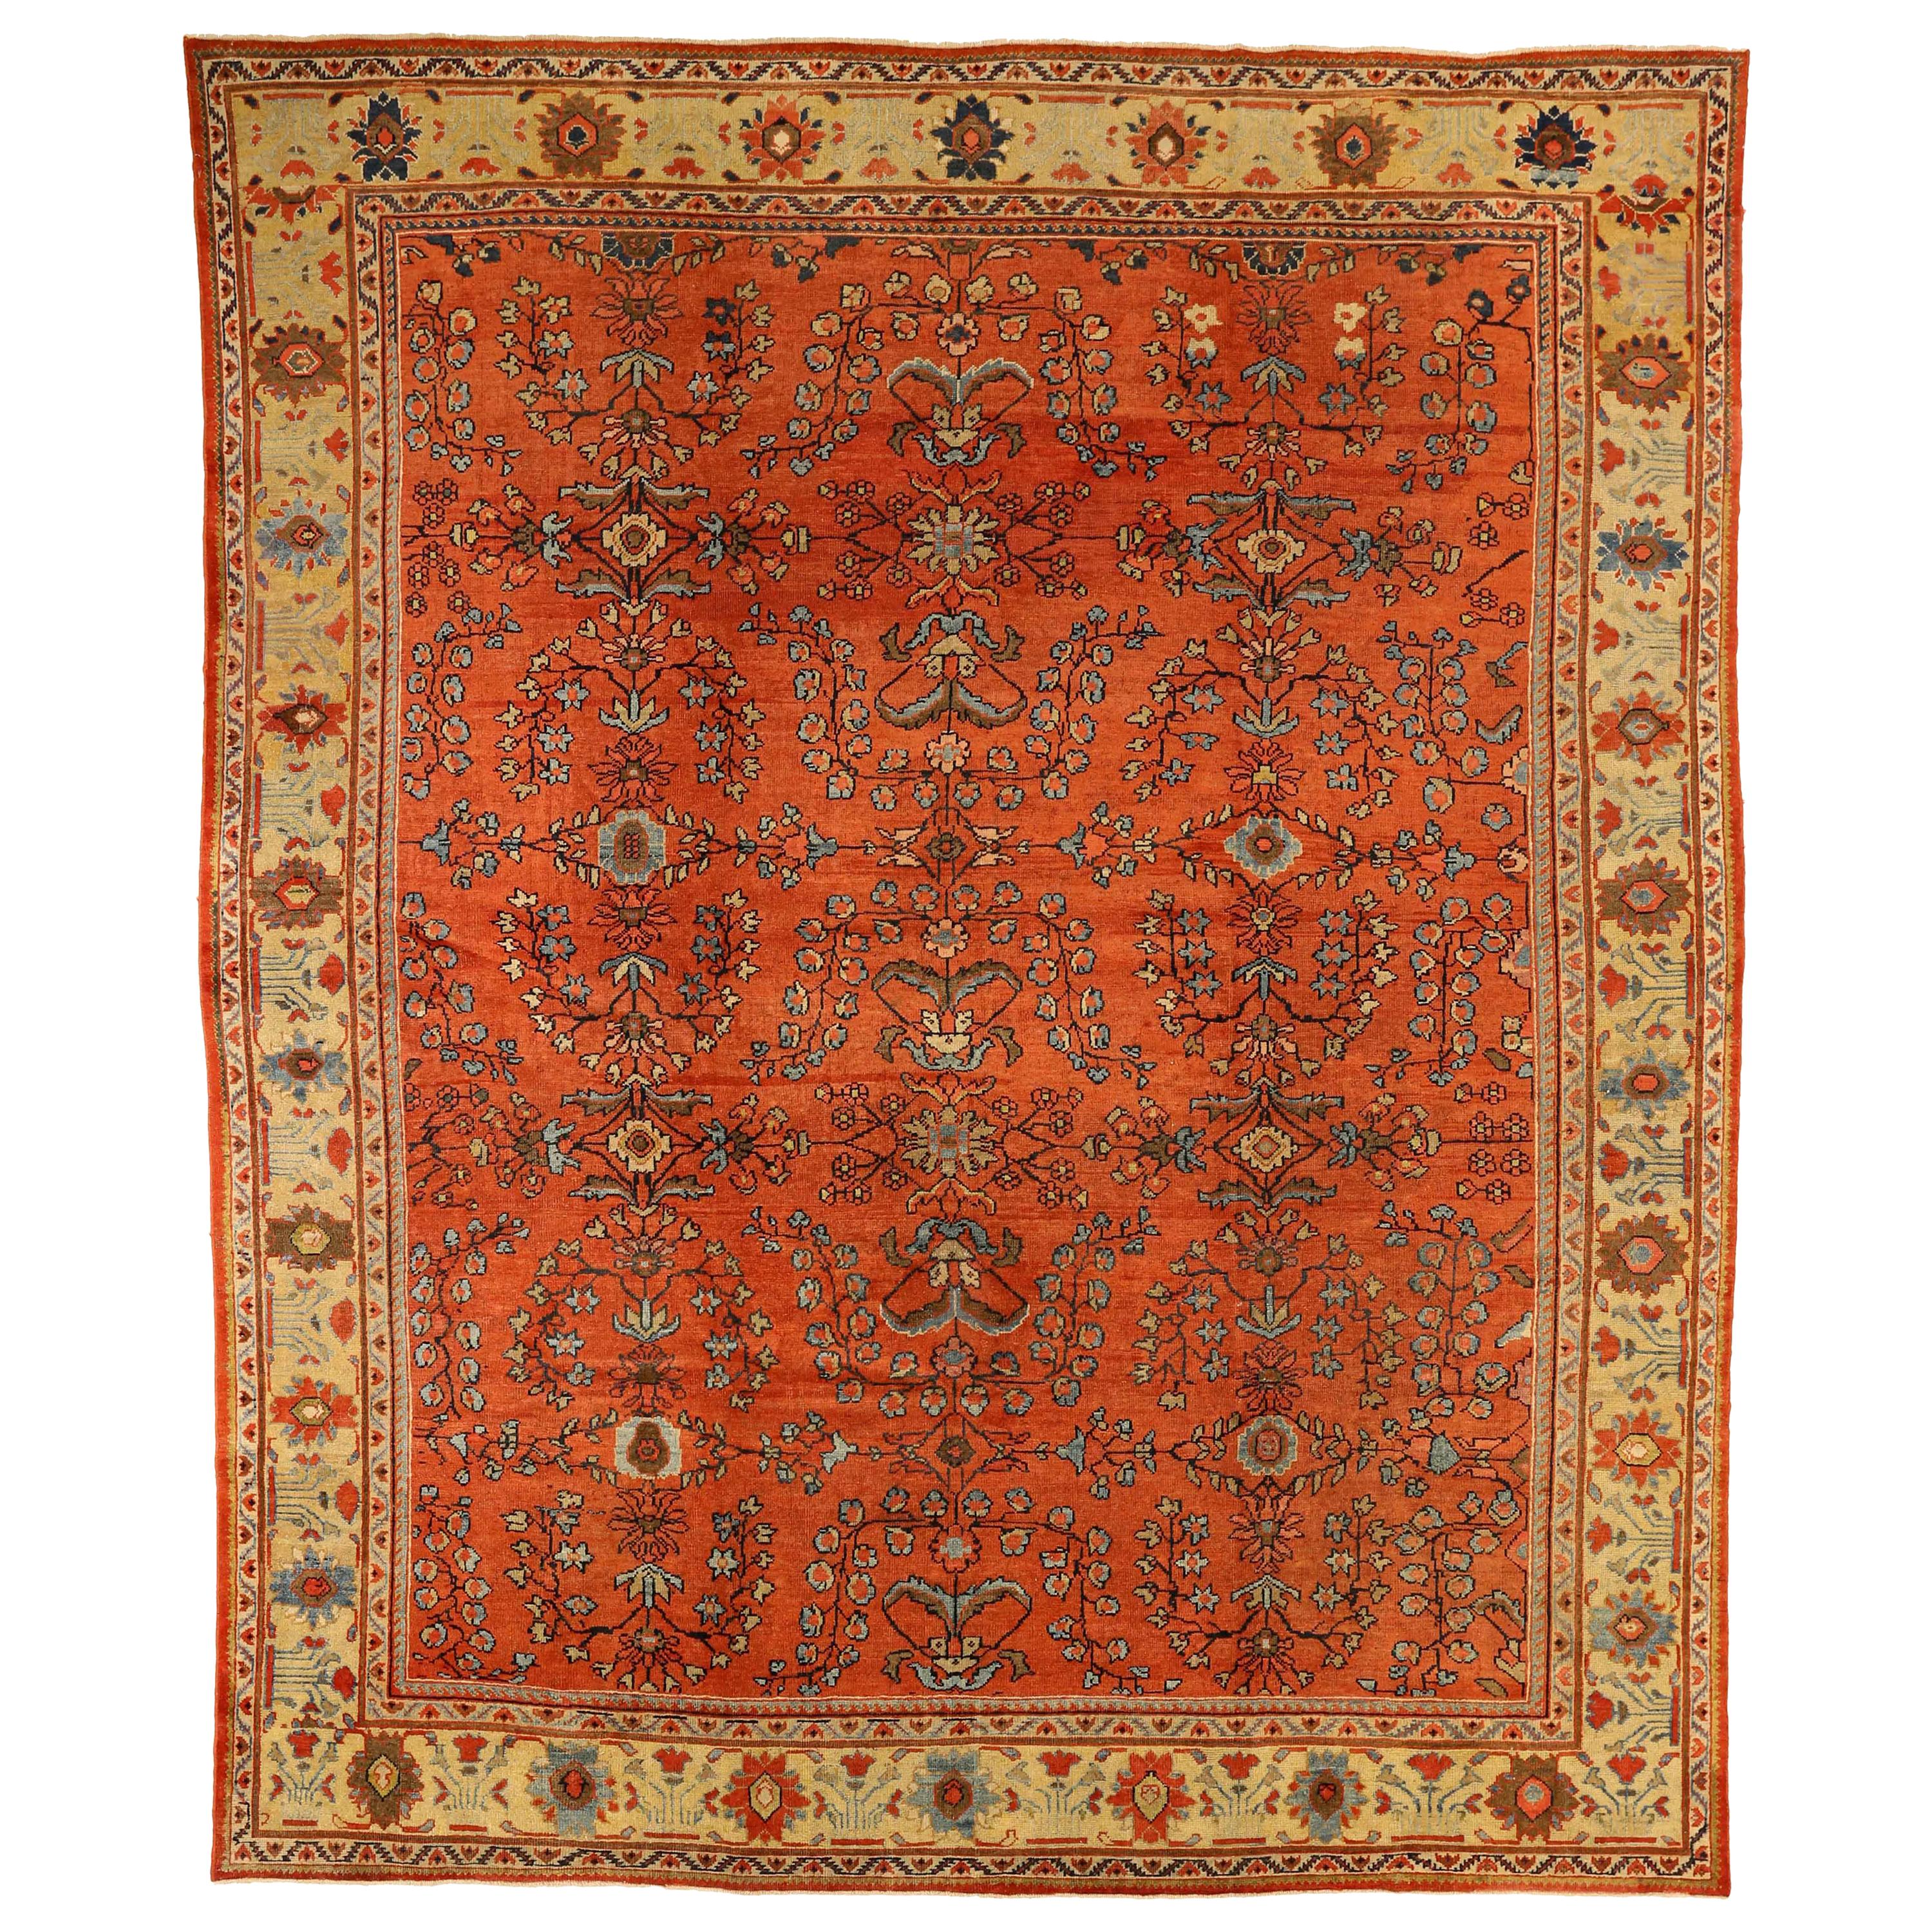 1920s Antique Mahal Persian Rug with Red and Yellow Floral Patterns For Sale